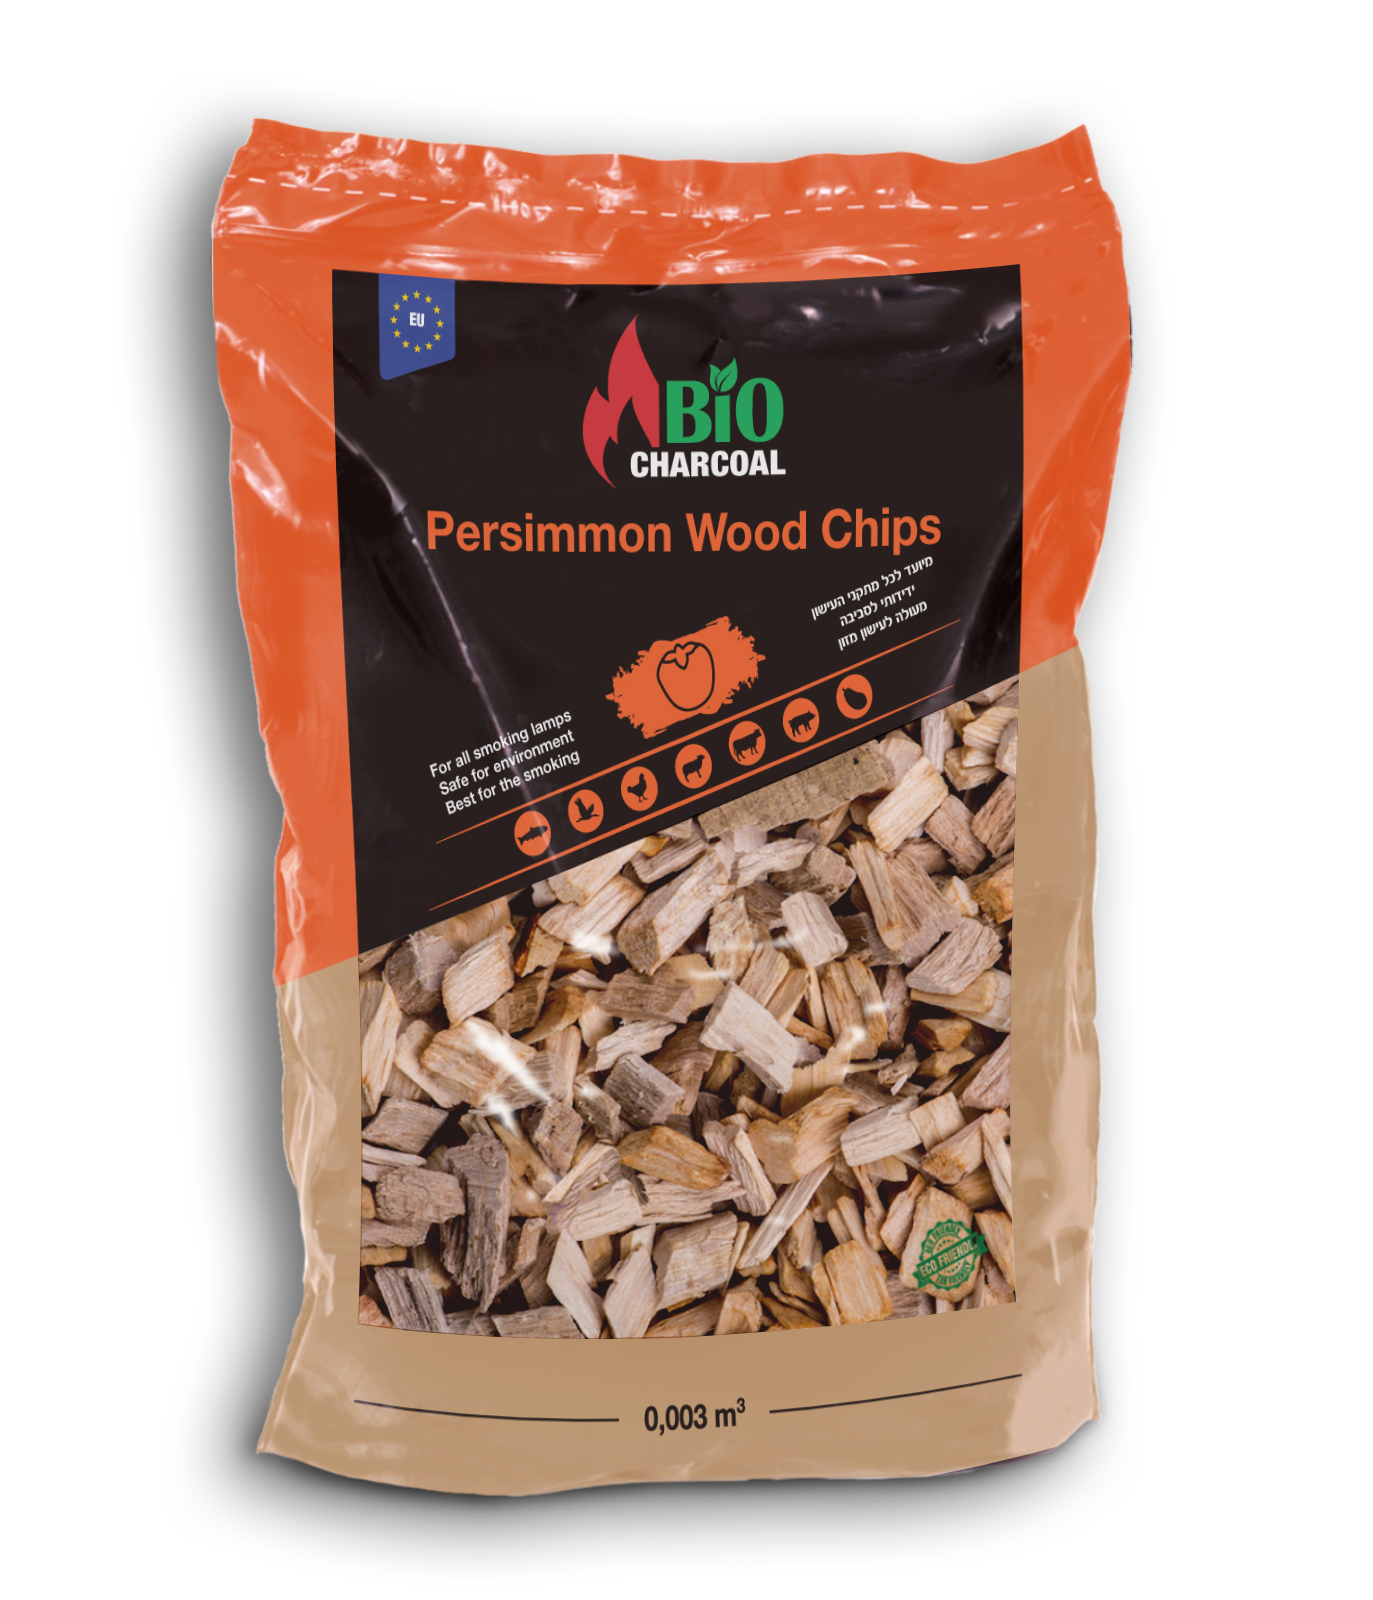 Persimmon Wood Chips